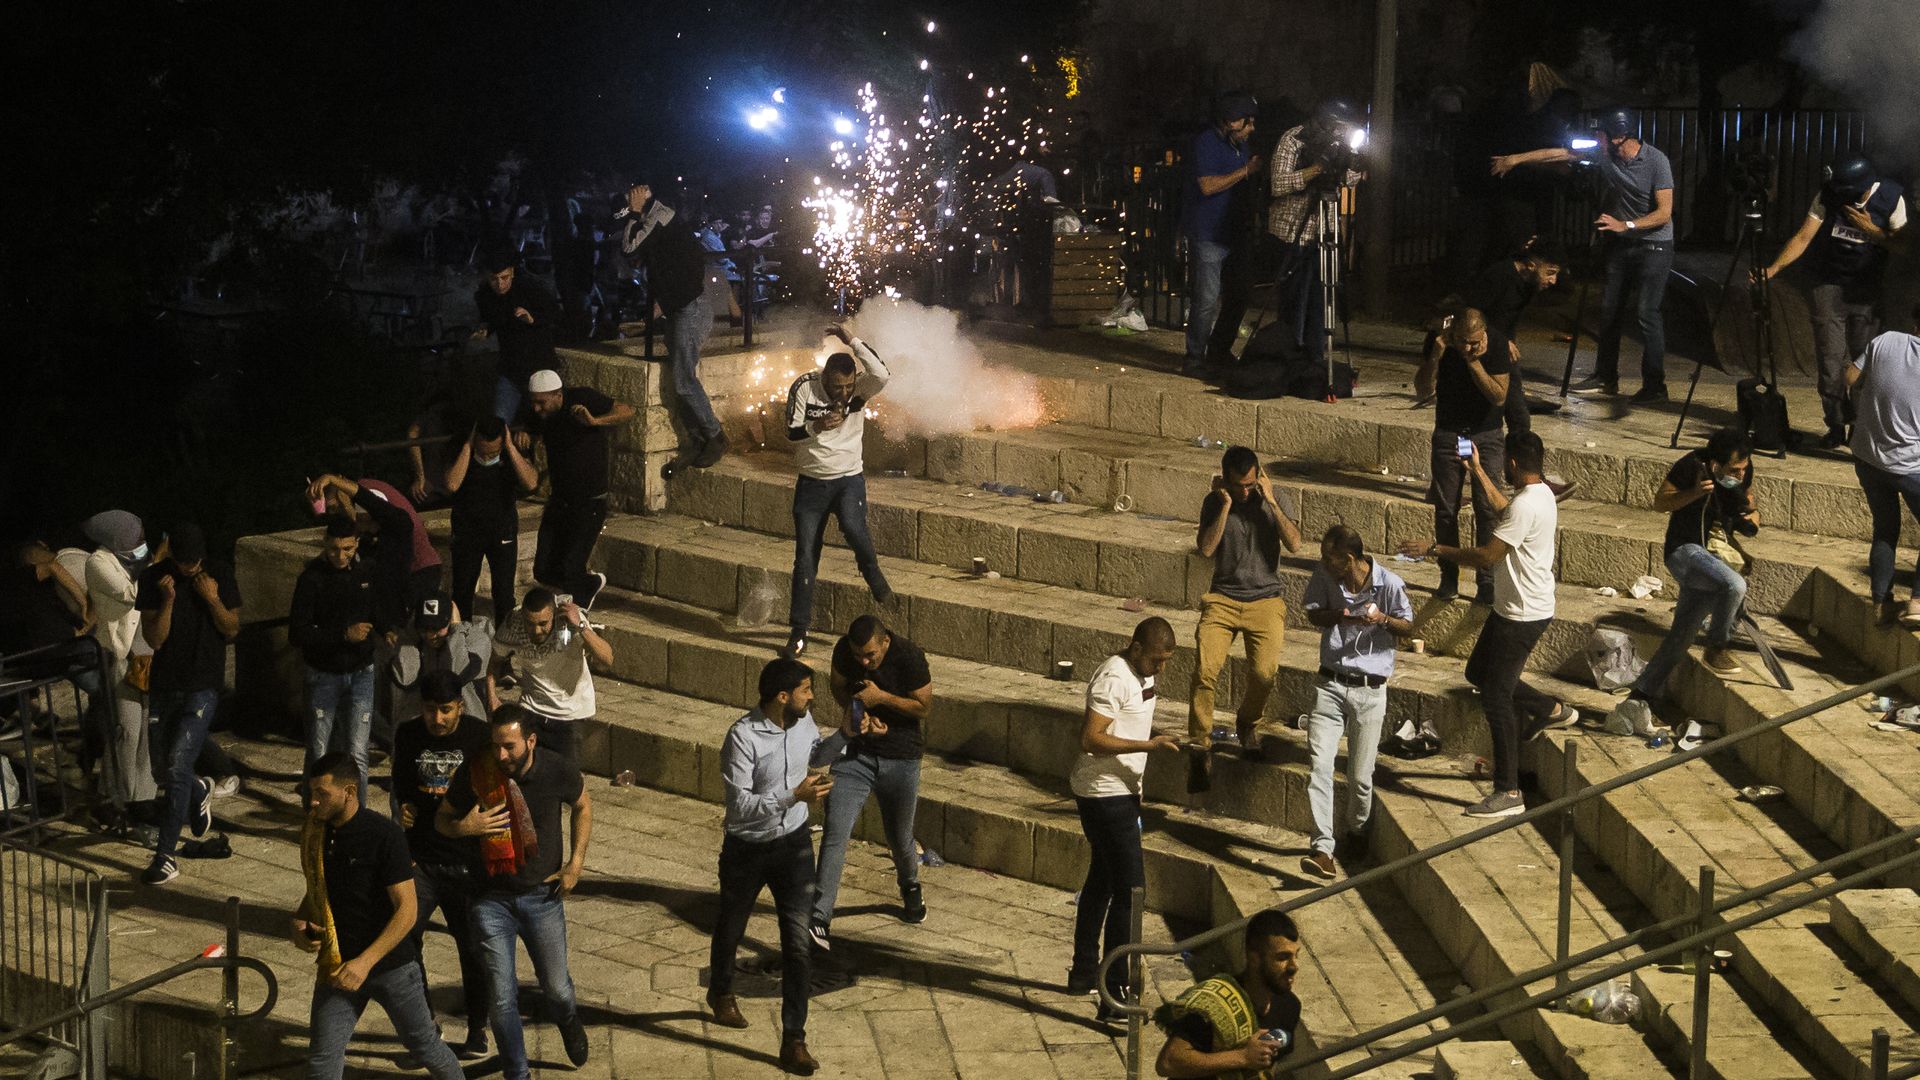 Palestinians escape from a stun grenade fired by Israeli police officers during clashes at Damascus Gate during the holy month of Ramadan on May 8, 2021 in Jerusalem, Israel. 